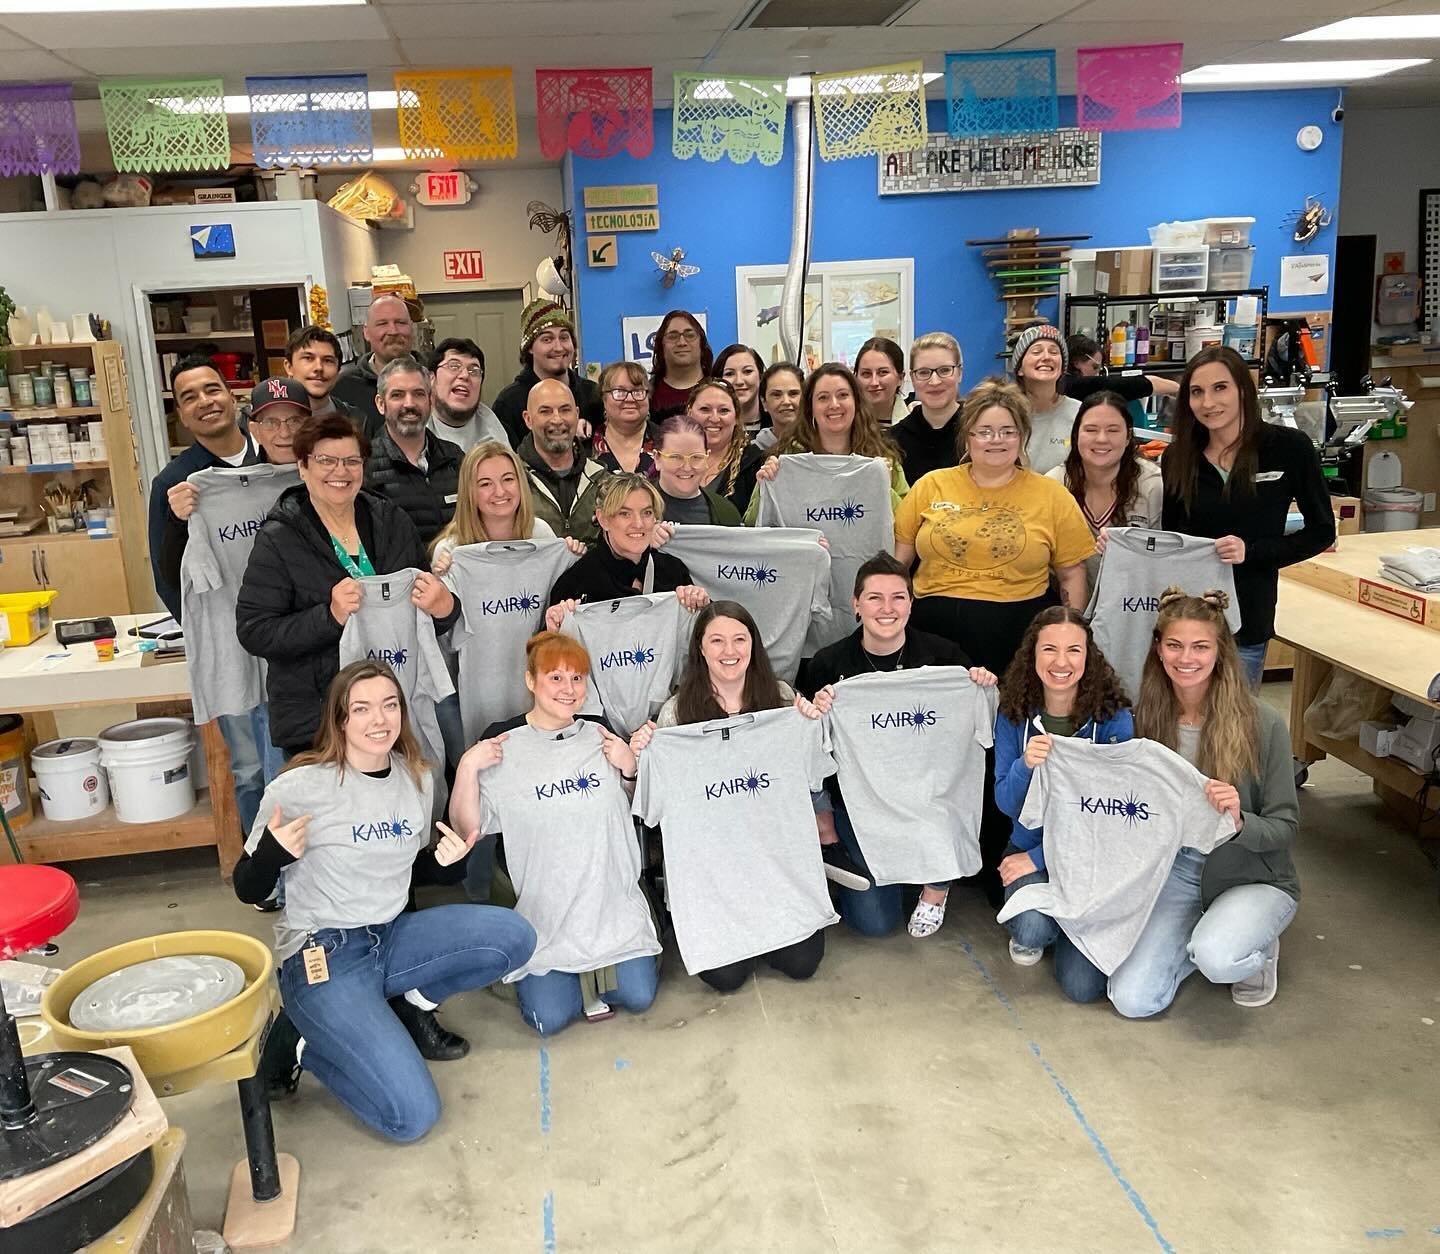 [Espa&ntilde;ol abajo] 
We loved having the team&nbsp;@kairosnw come to the makerspace to screenprint their tees and make custom laser-engraved name tags. It was one of the largest groups we&rsquo;ve had for this type of team building, and we are so 